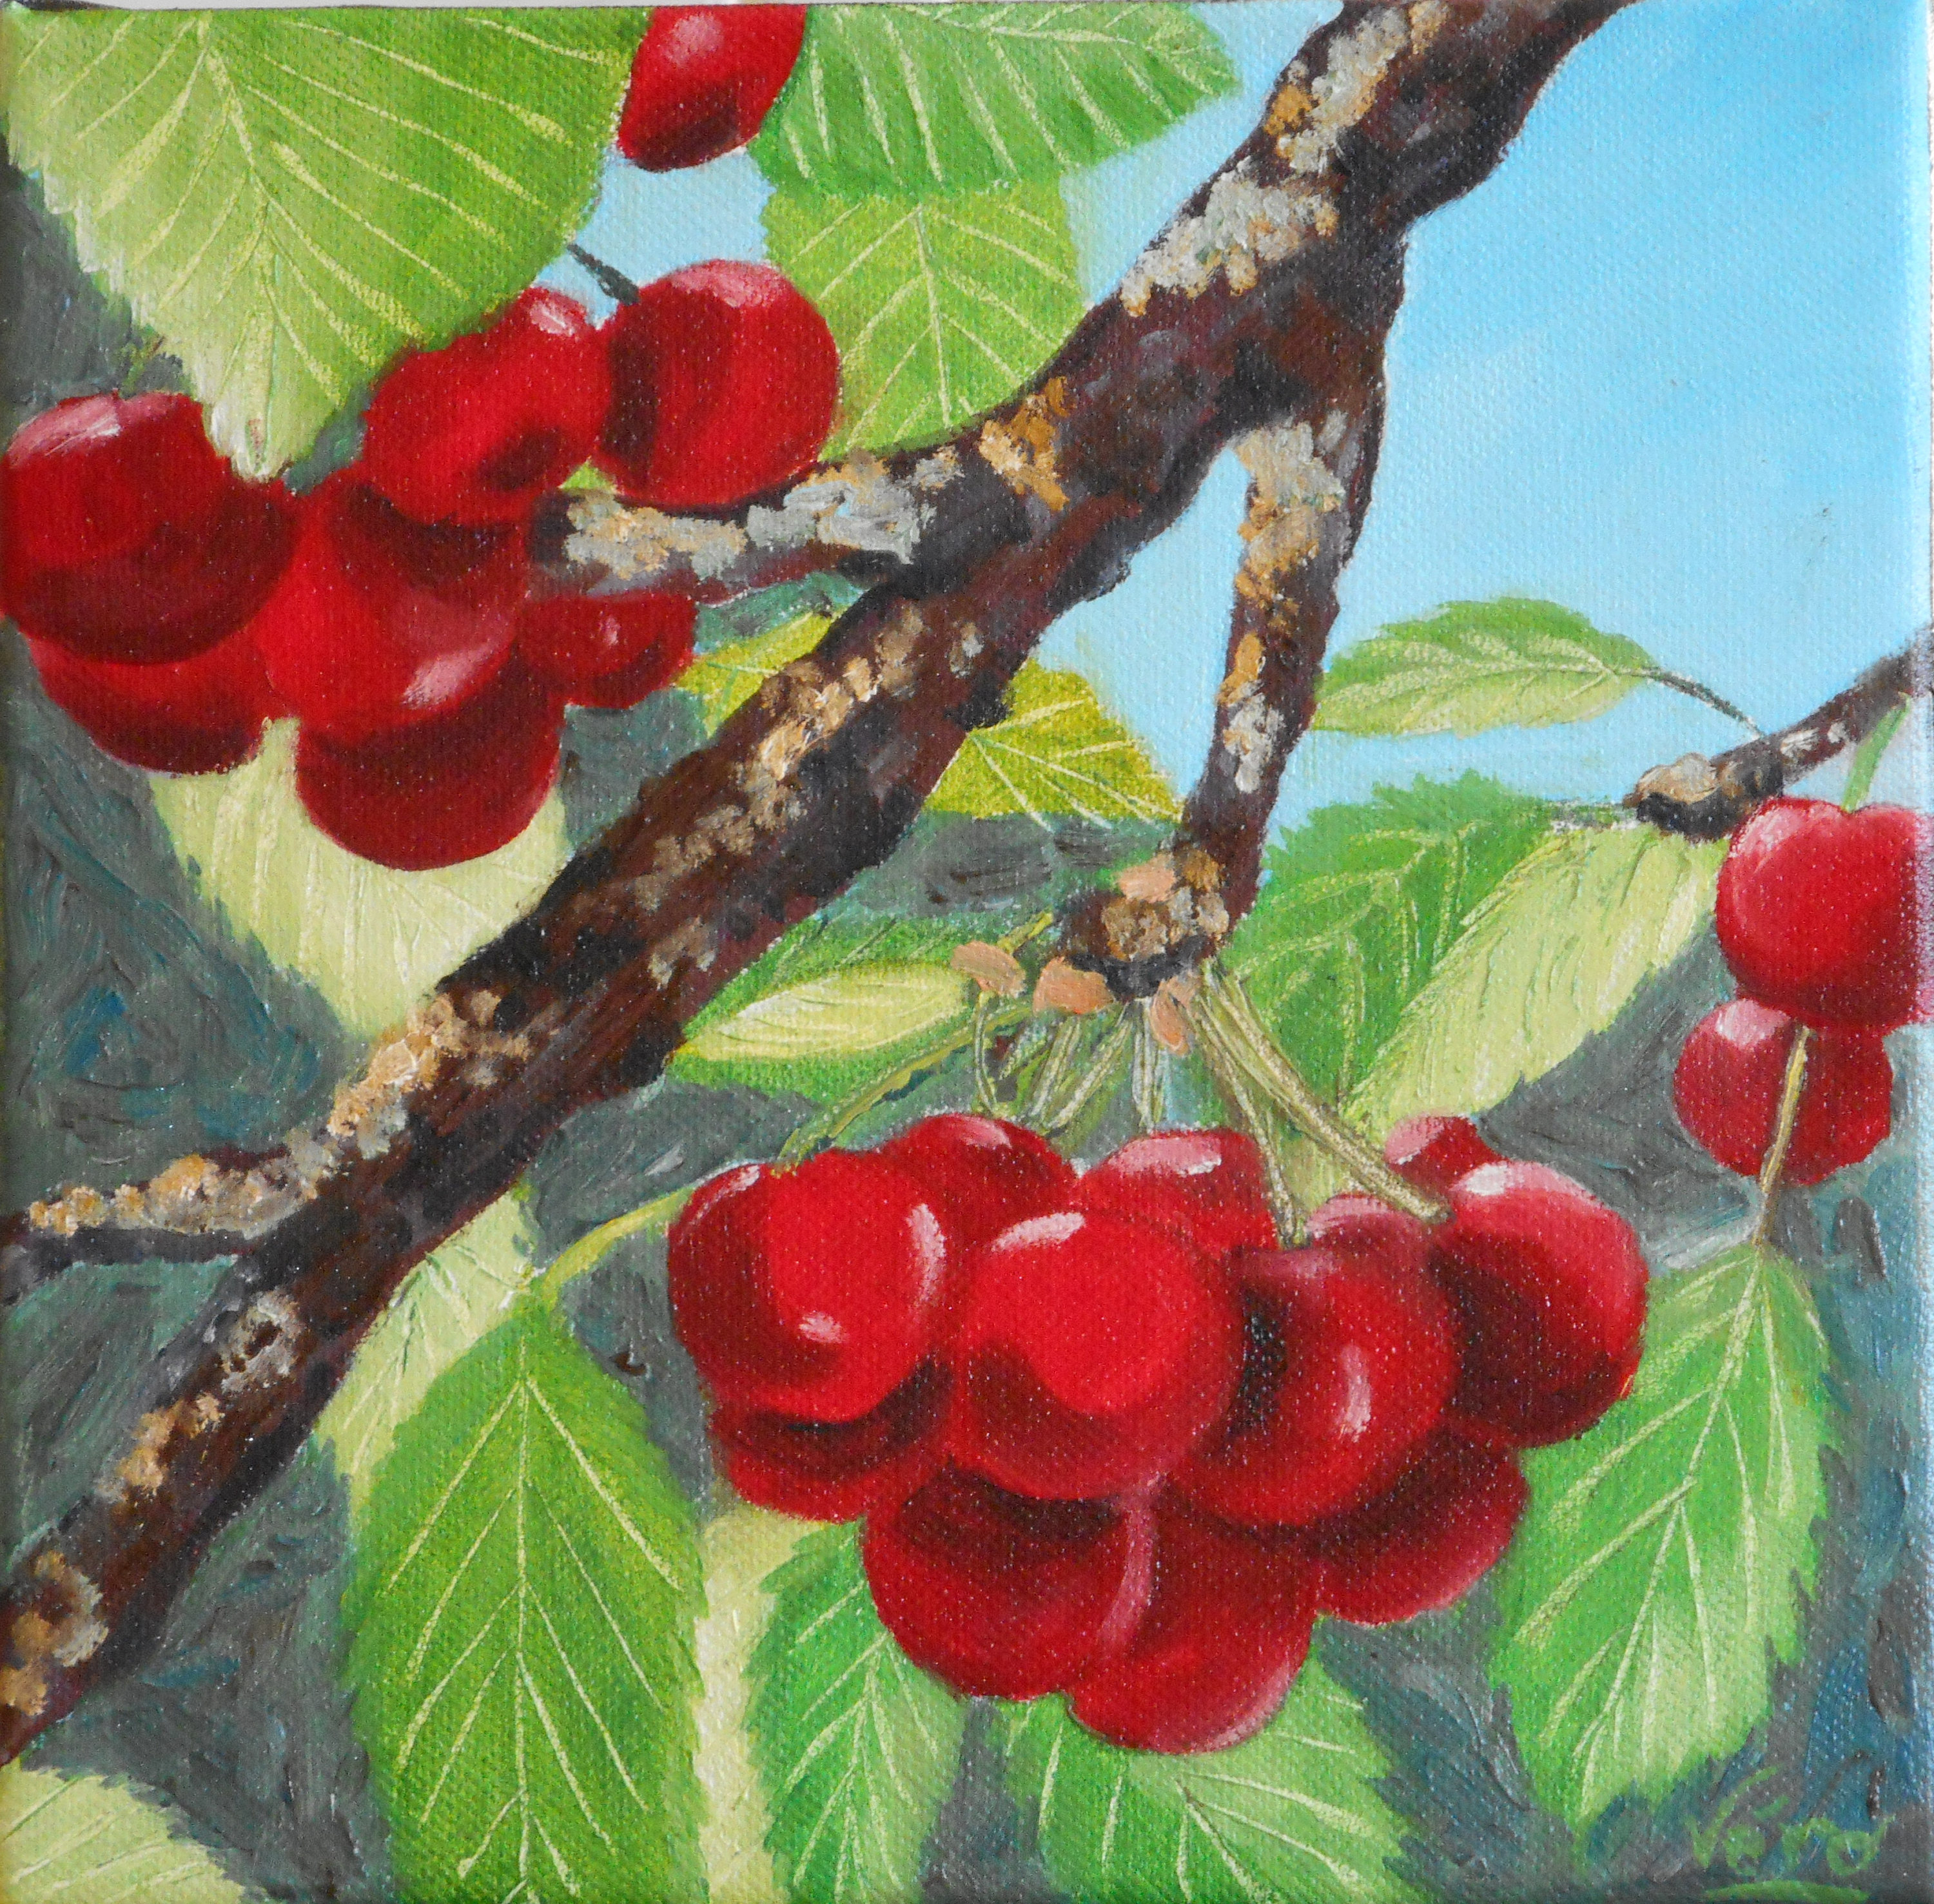 Buy Oil Cherry Paint or Small Format Fruit Painting Handmade Online in - Etsy